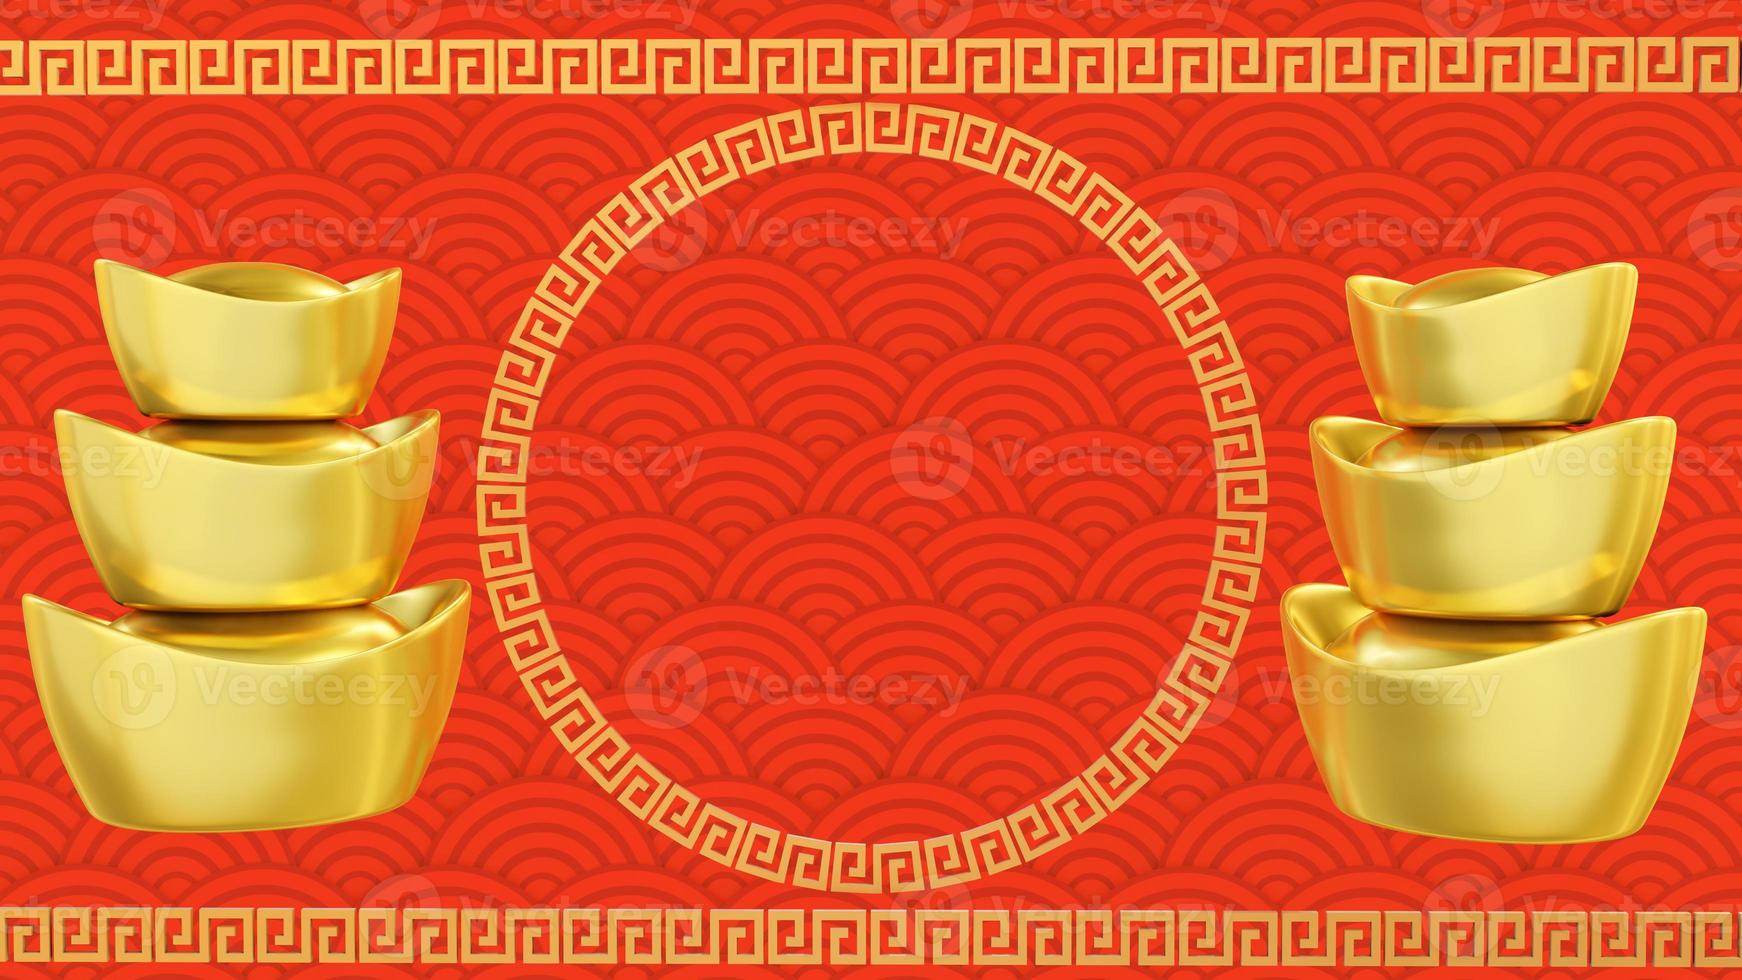 Chinese New Year greeting card. year of the rat. Golden and red ornament. 3D style design. Concept for holiday banner template, decor element photo